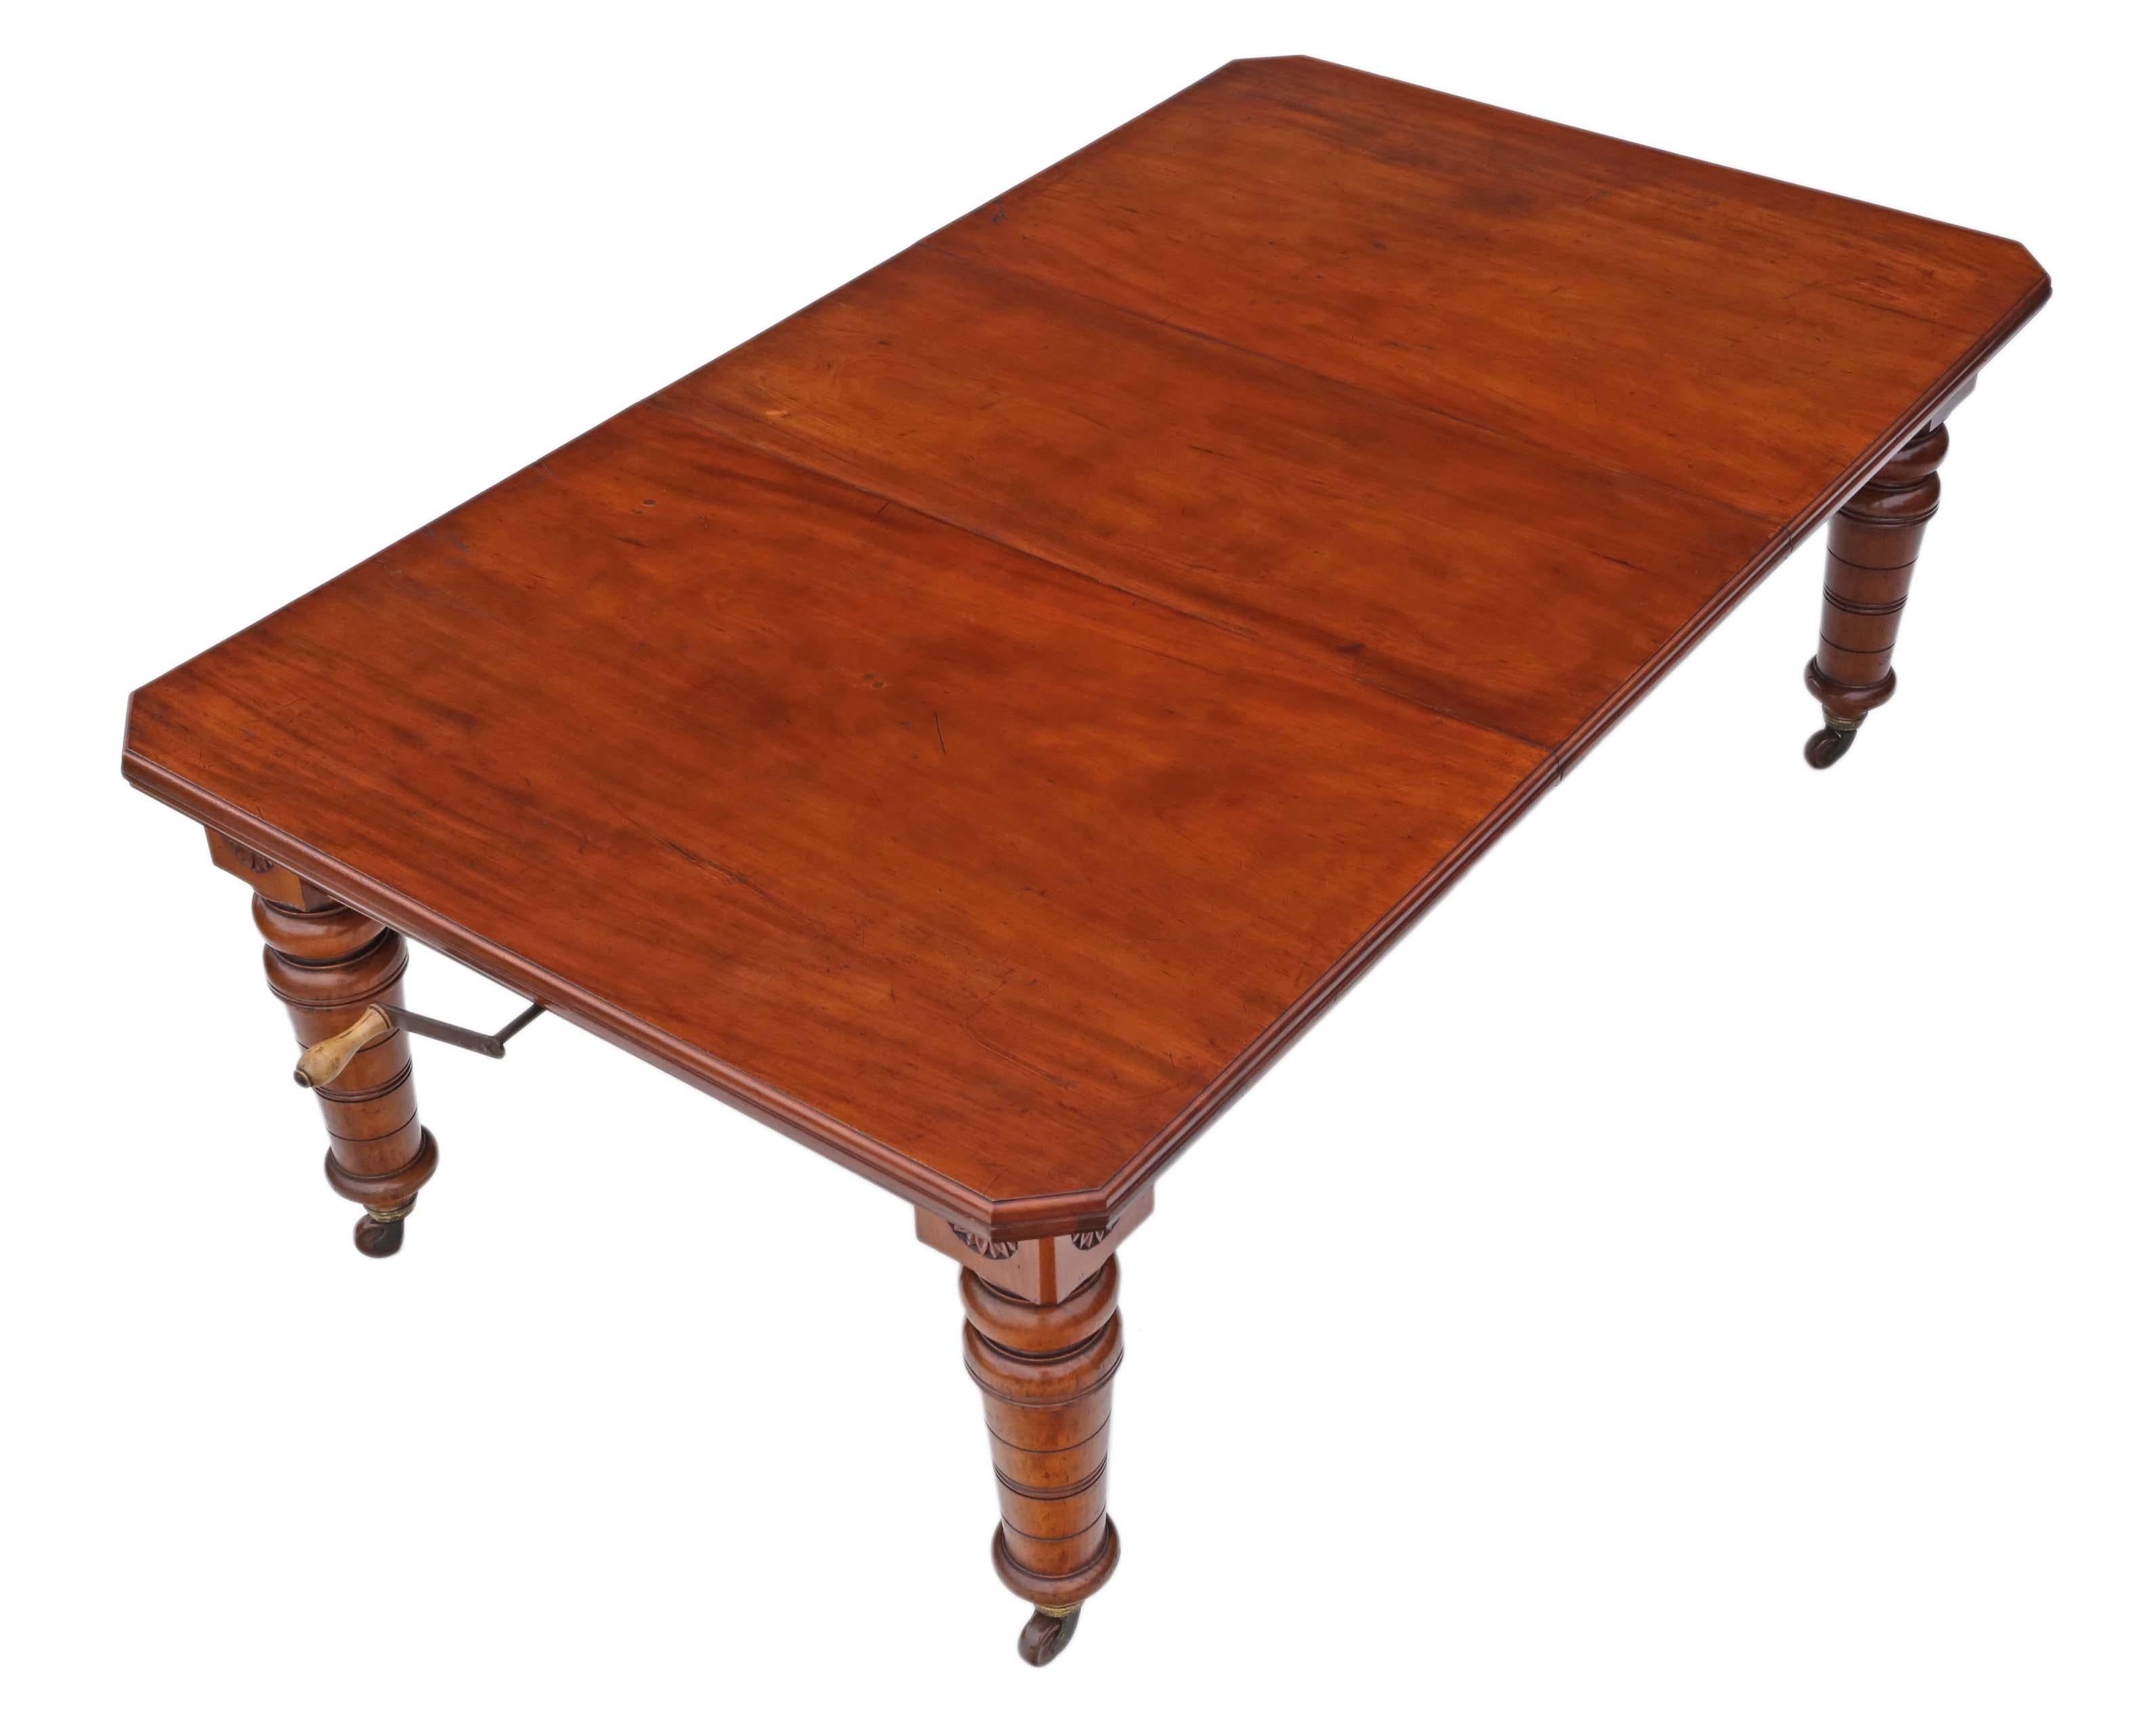 Victorian walnut windout extending dining table approximately 7' x 4' (exact dimensions below) when extended.
A lovely table dating from circa 1880.
This is a quality (better than most) table, that is full of age, charm and character.
Rare and